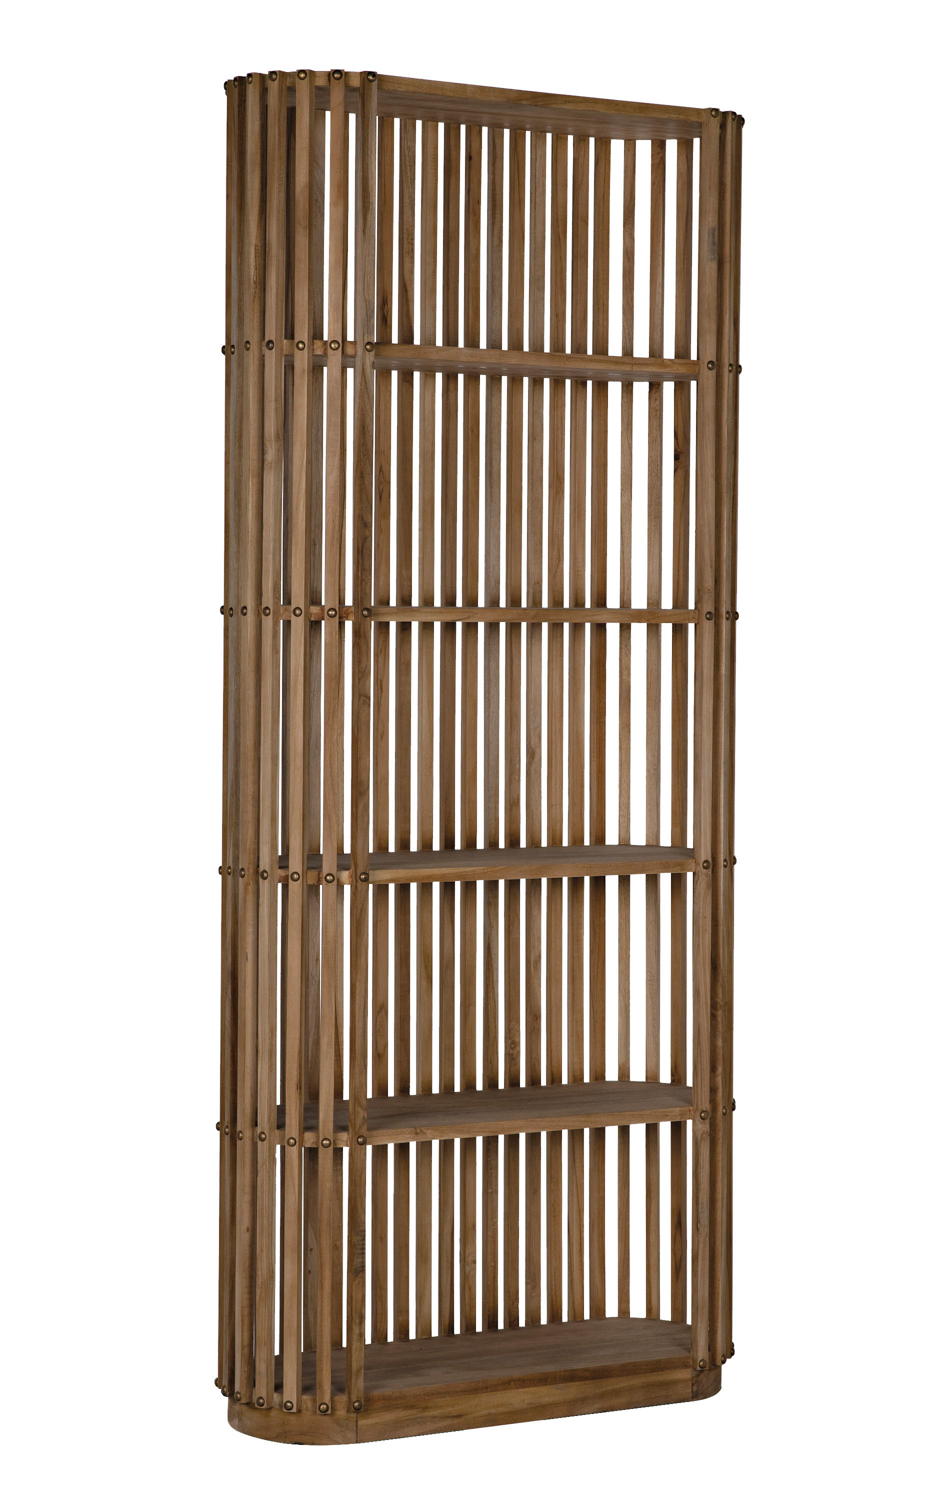 brown bamboo bookcase suggested by Aiste Kuchta